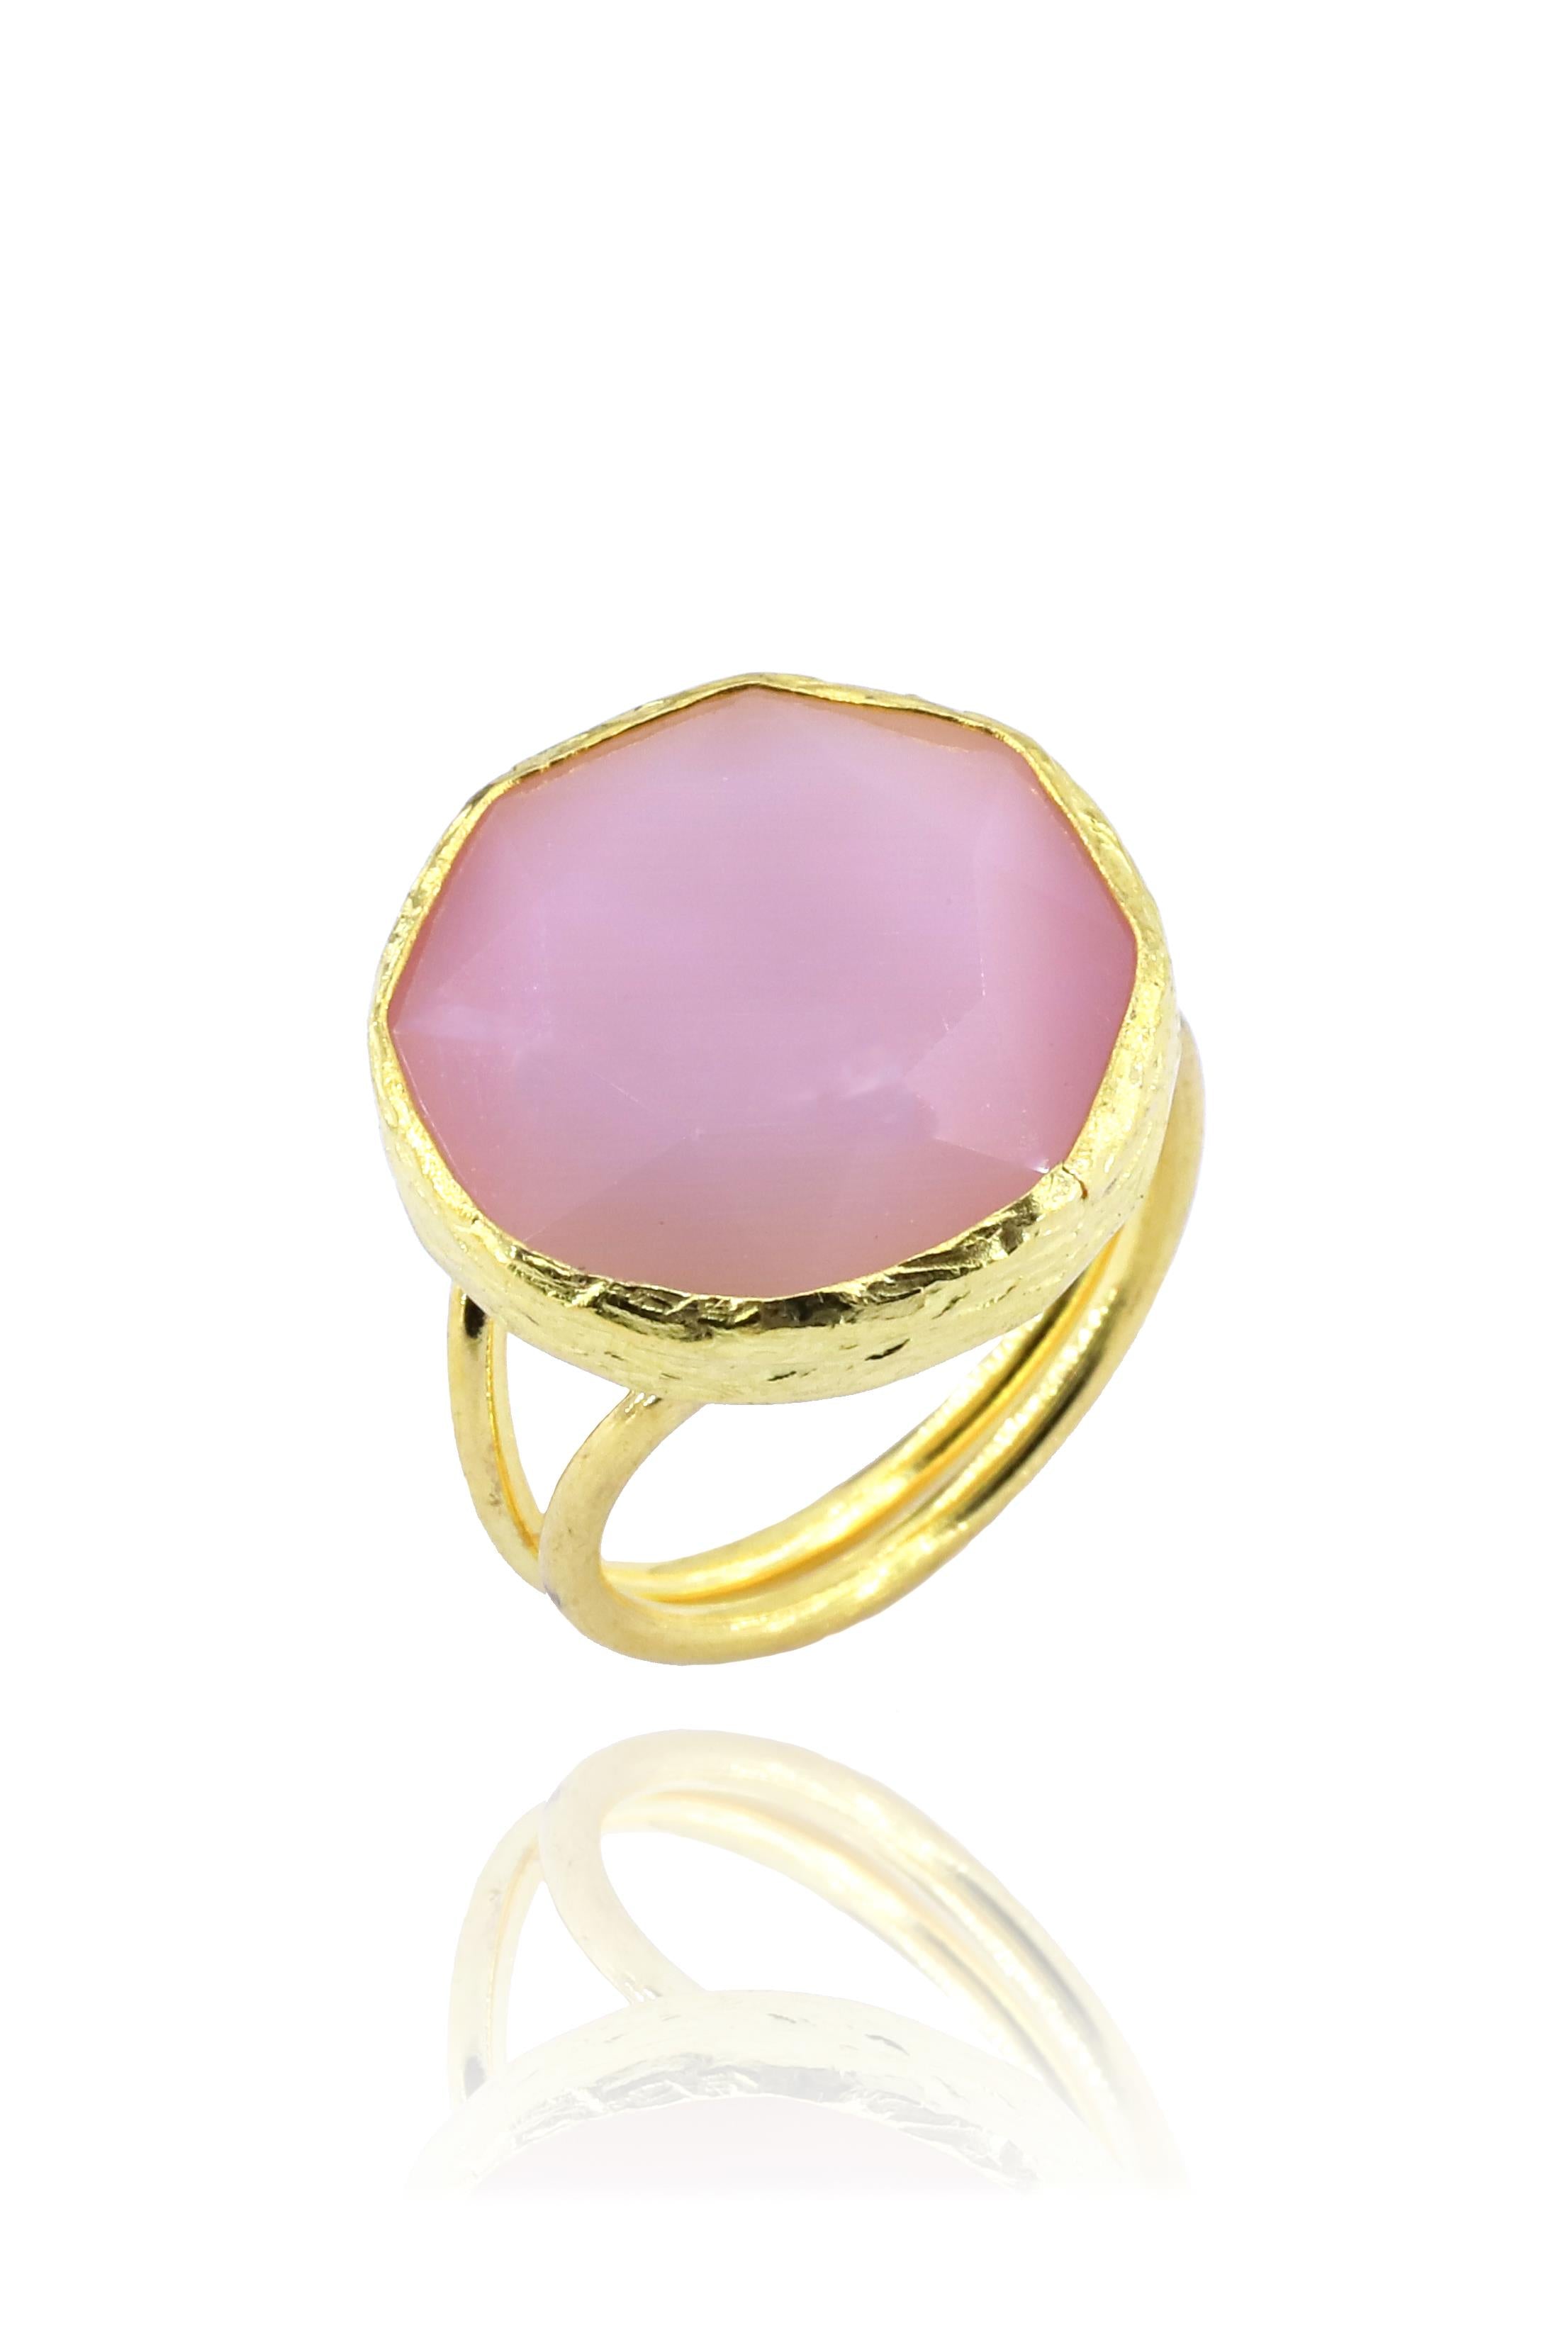 Sun Stone Cat's Eye Round Pink 22K Gold Gold Yellow Plated Women's Ring